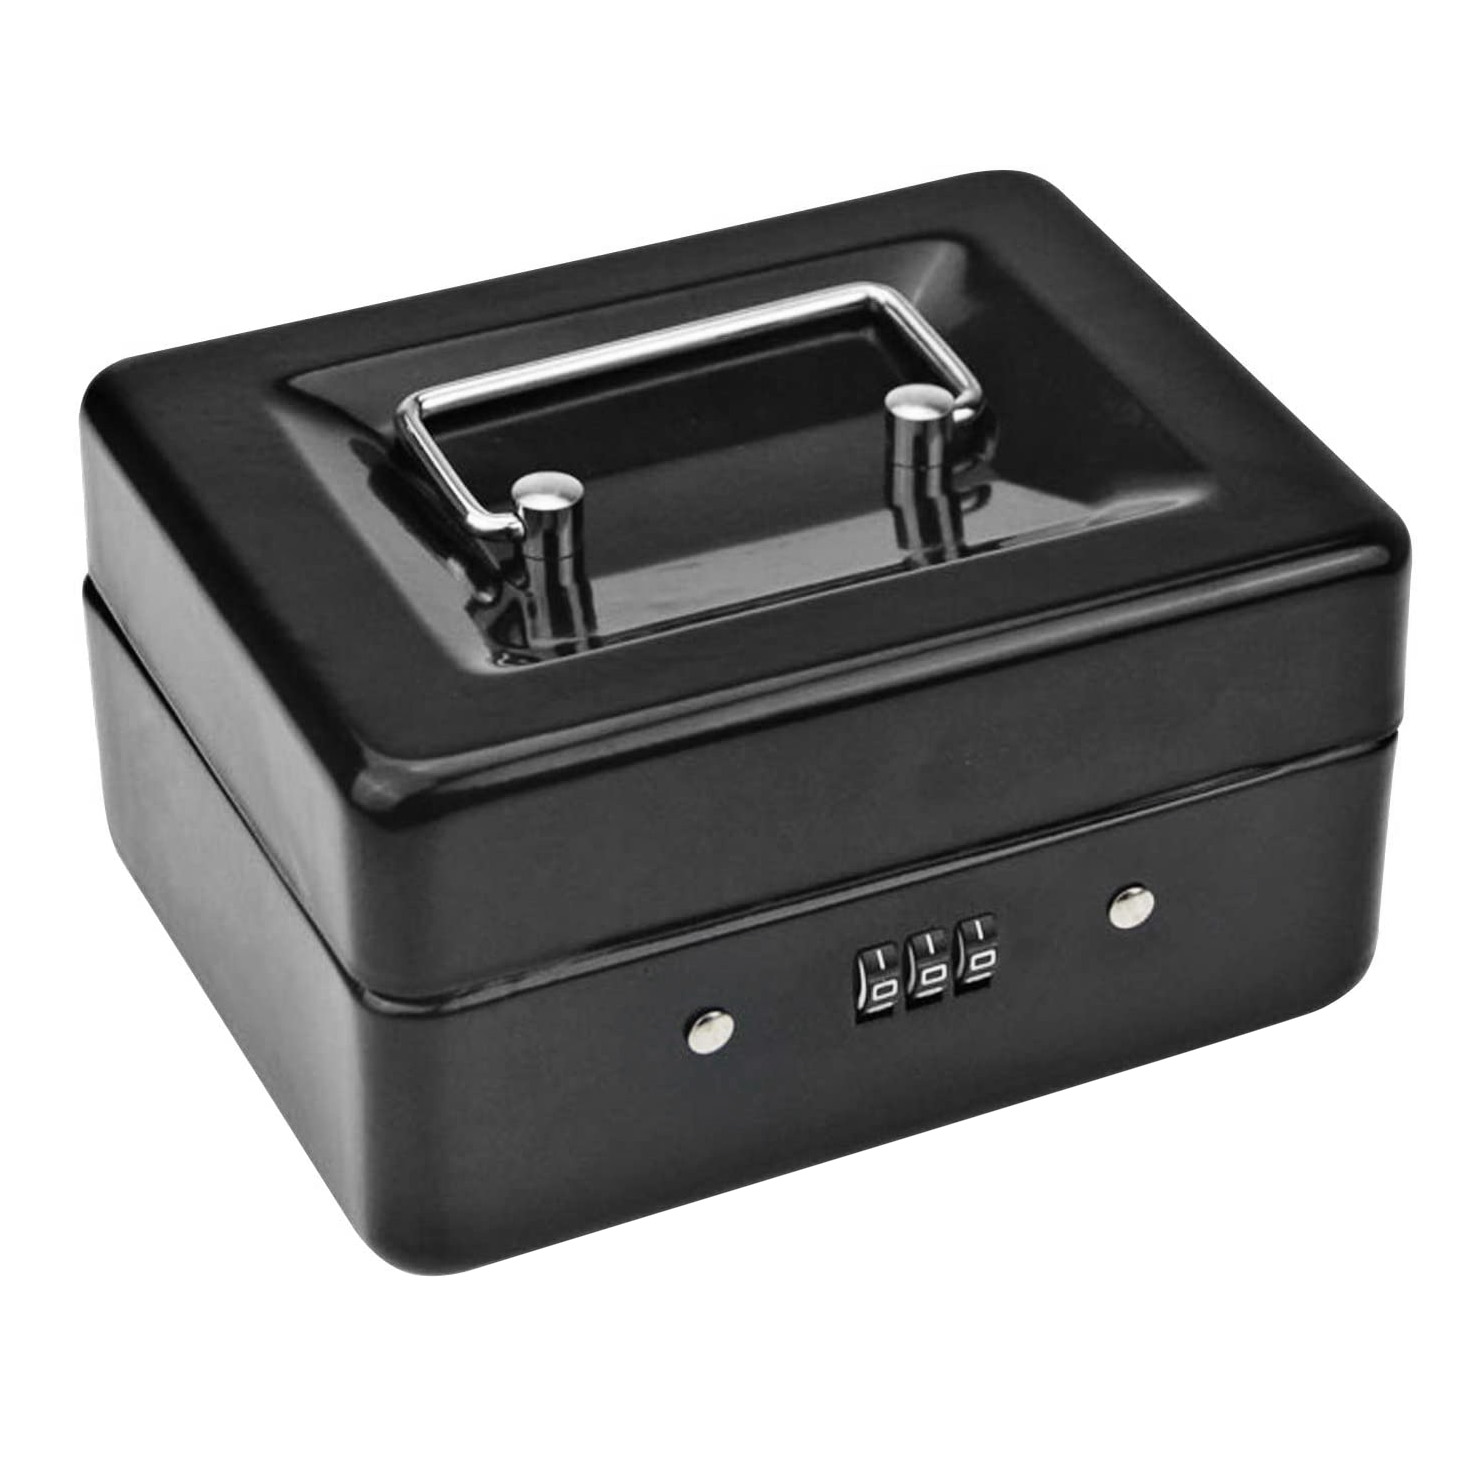 Durable Metal Coin Box with Locking Storage Tray - Small Coin Box with Combination  Lock 15 x 12 x 7.7cm (Black) - Walmart.com